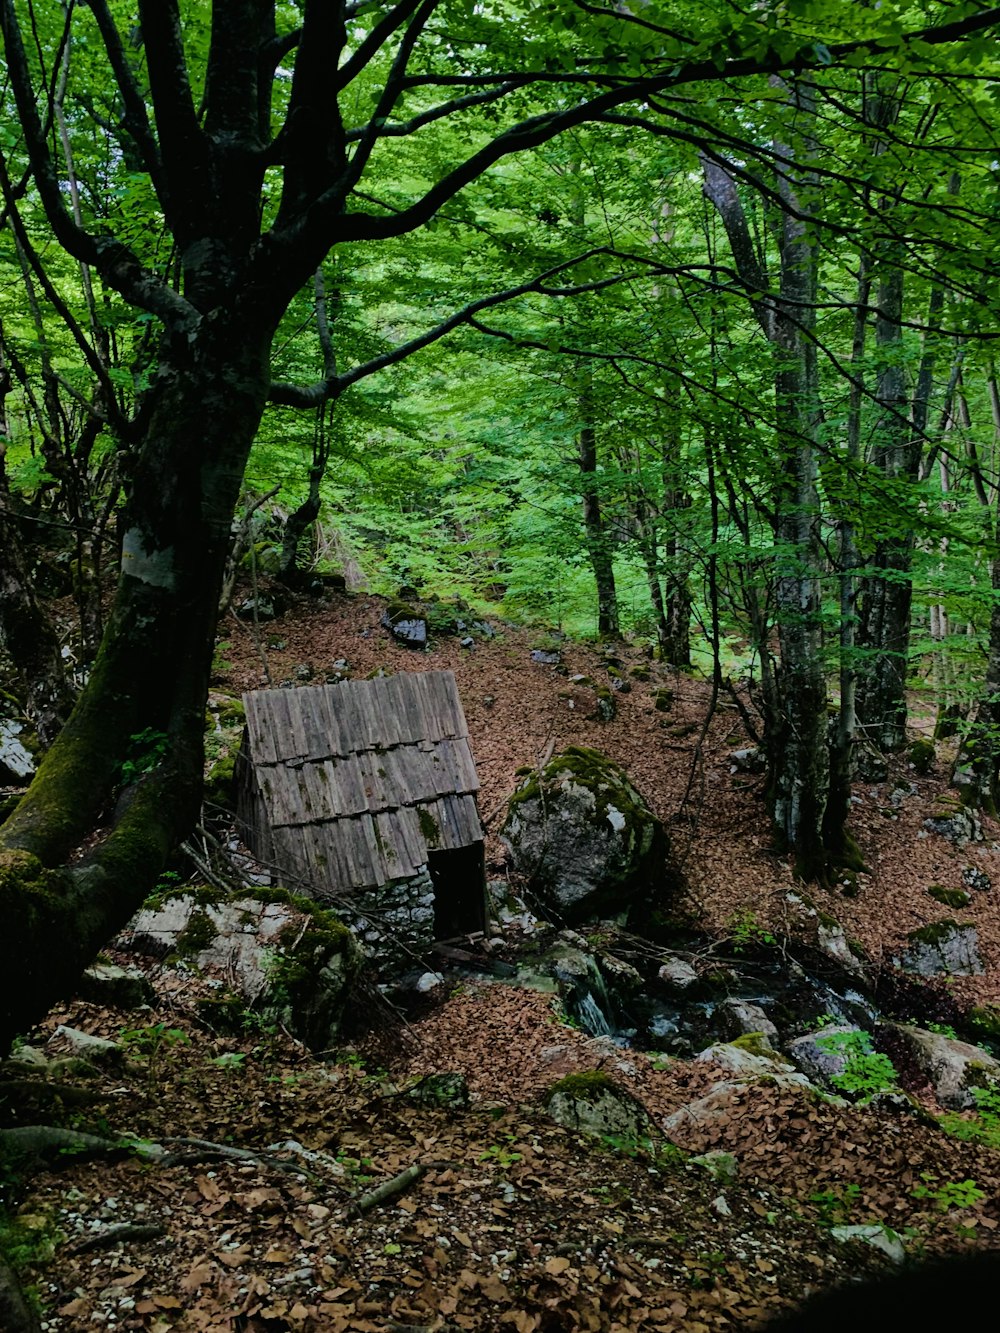 a small outhouse in the middle of a forest